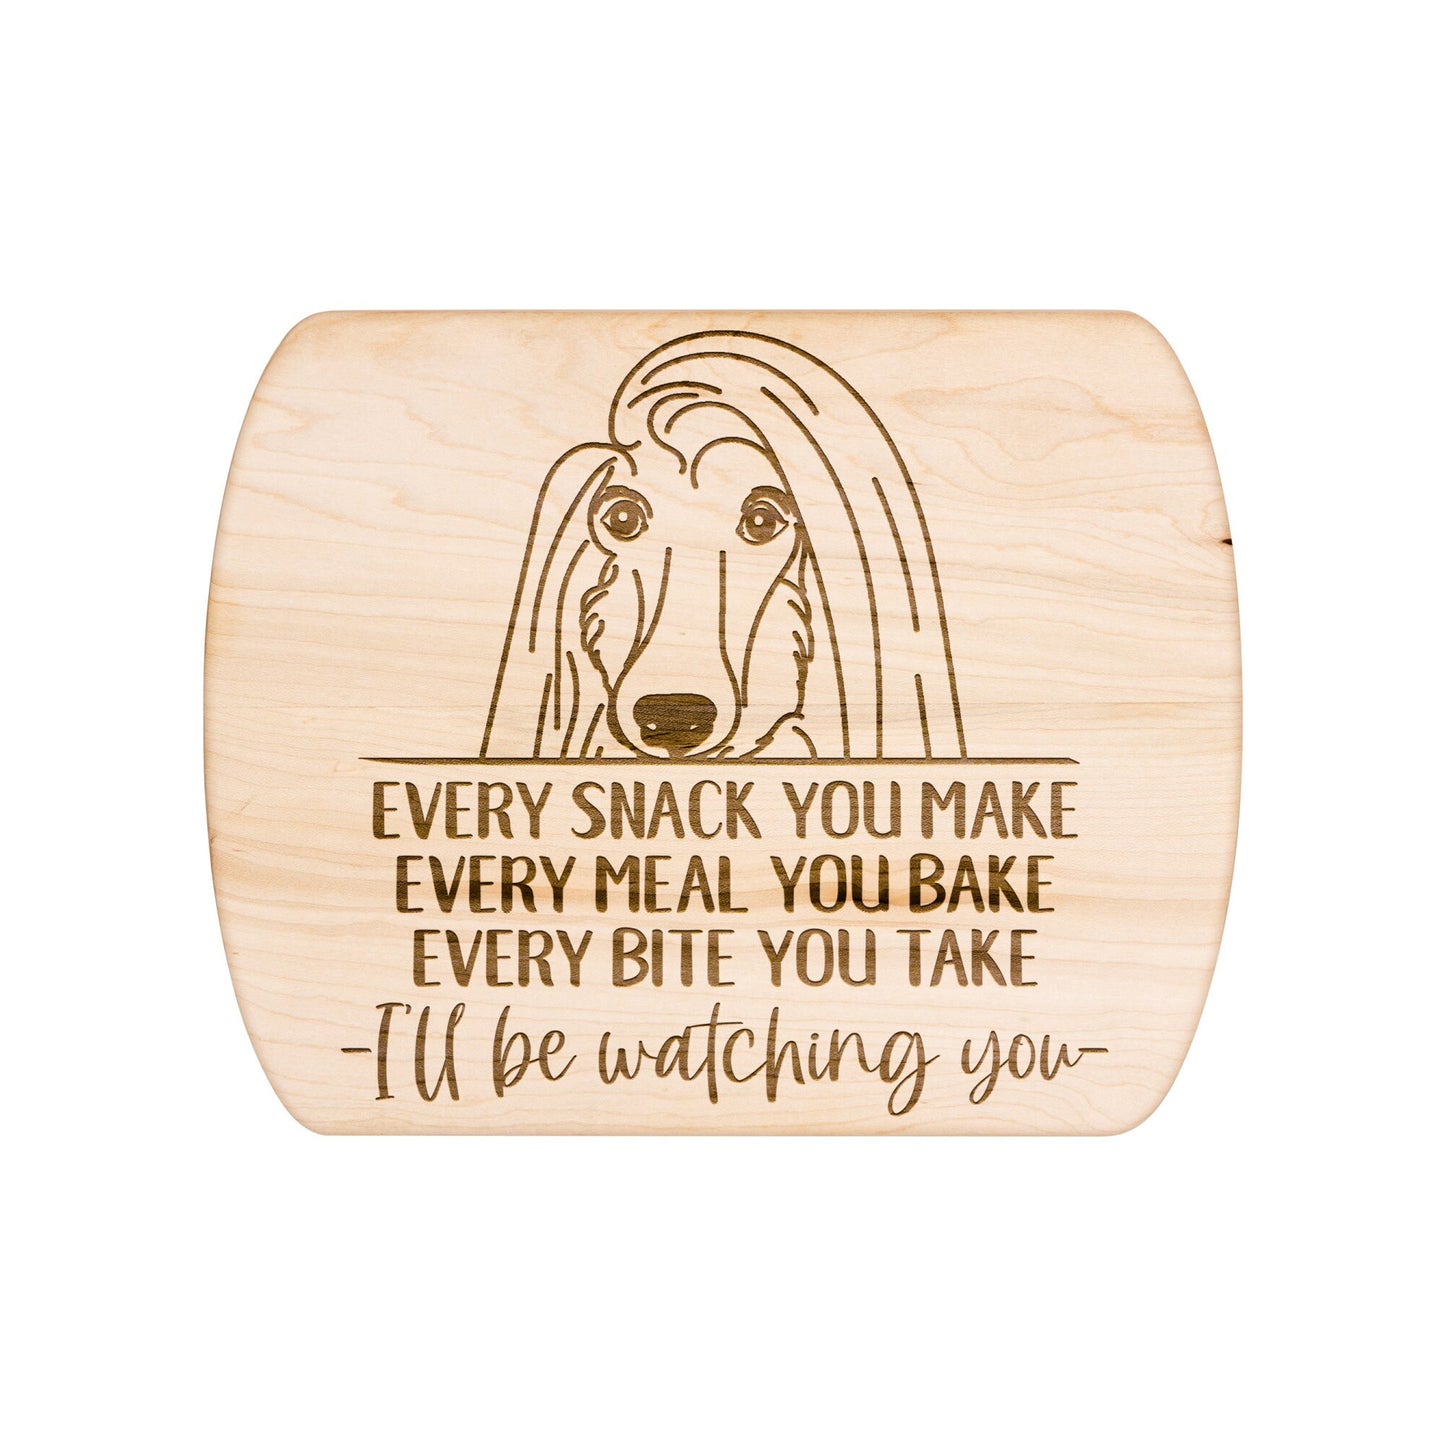 Afghan Hound Snack Funny Cutting Board for Dog Mom, Dog Lover Wood Serving Board, Charcuterie Board, Wooden Chopping Board Gifts for Him